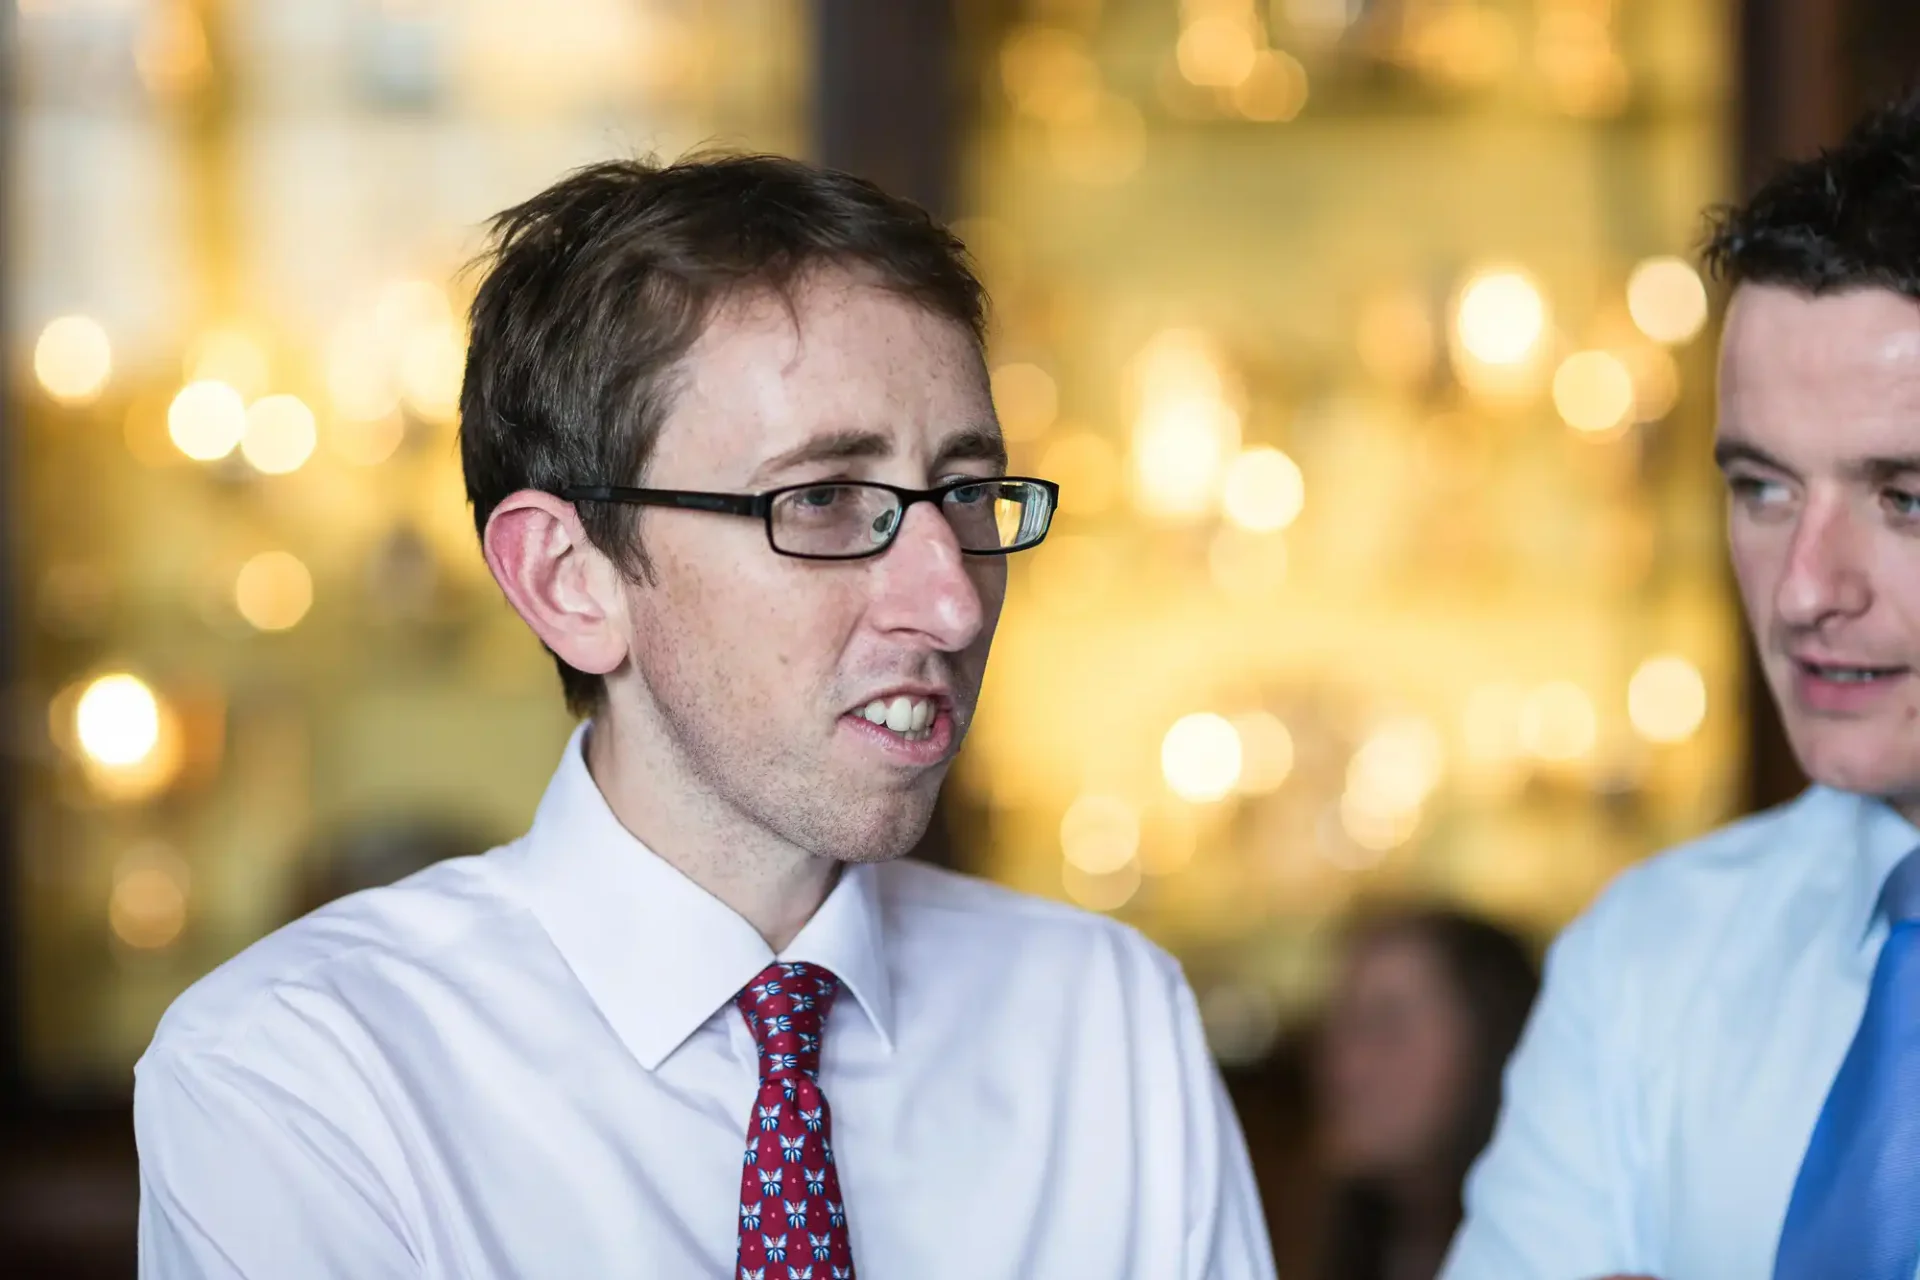 Two men in business attire engaging in conversation, one wearing glasses and speaking animatedly in a restaurant with blurred background.